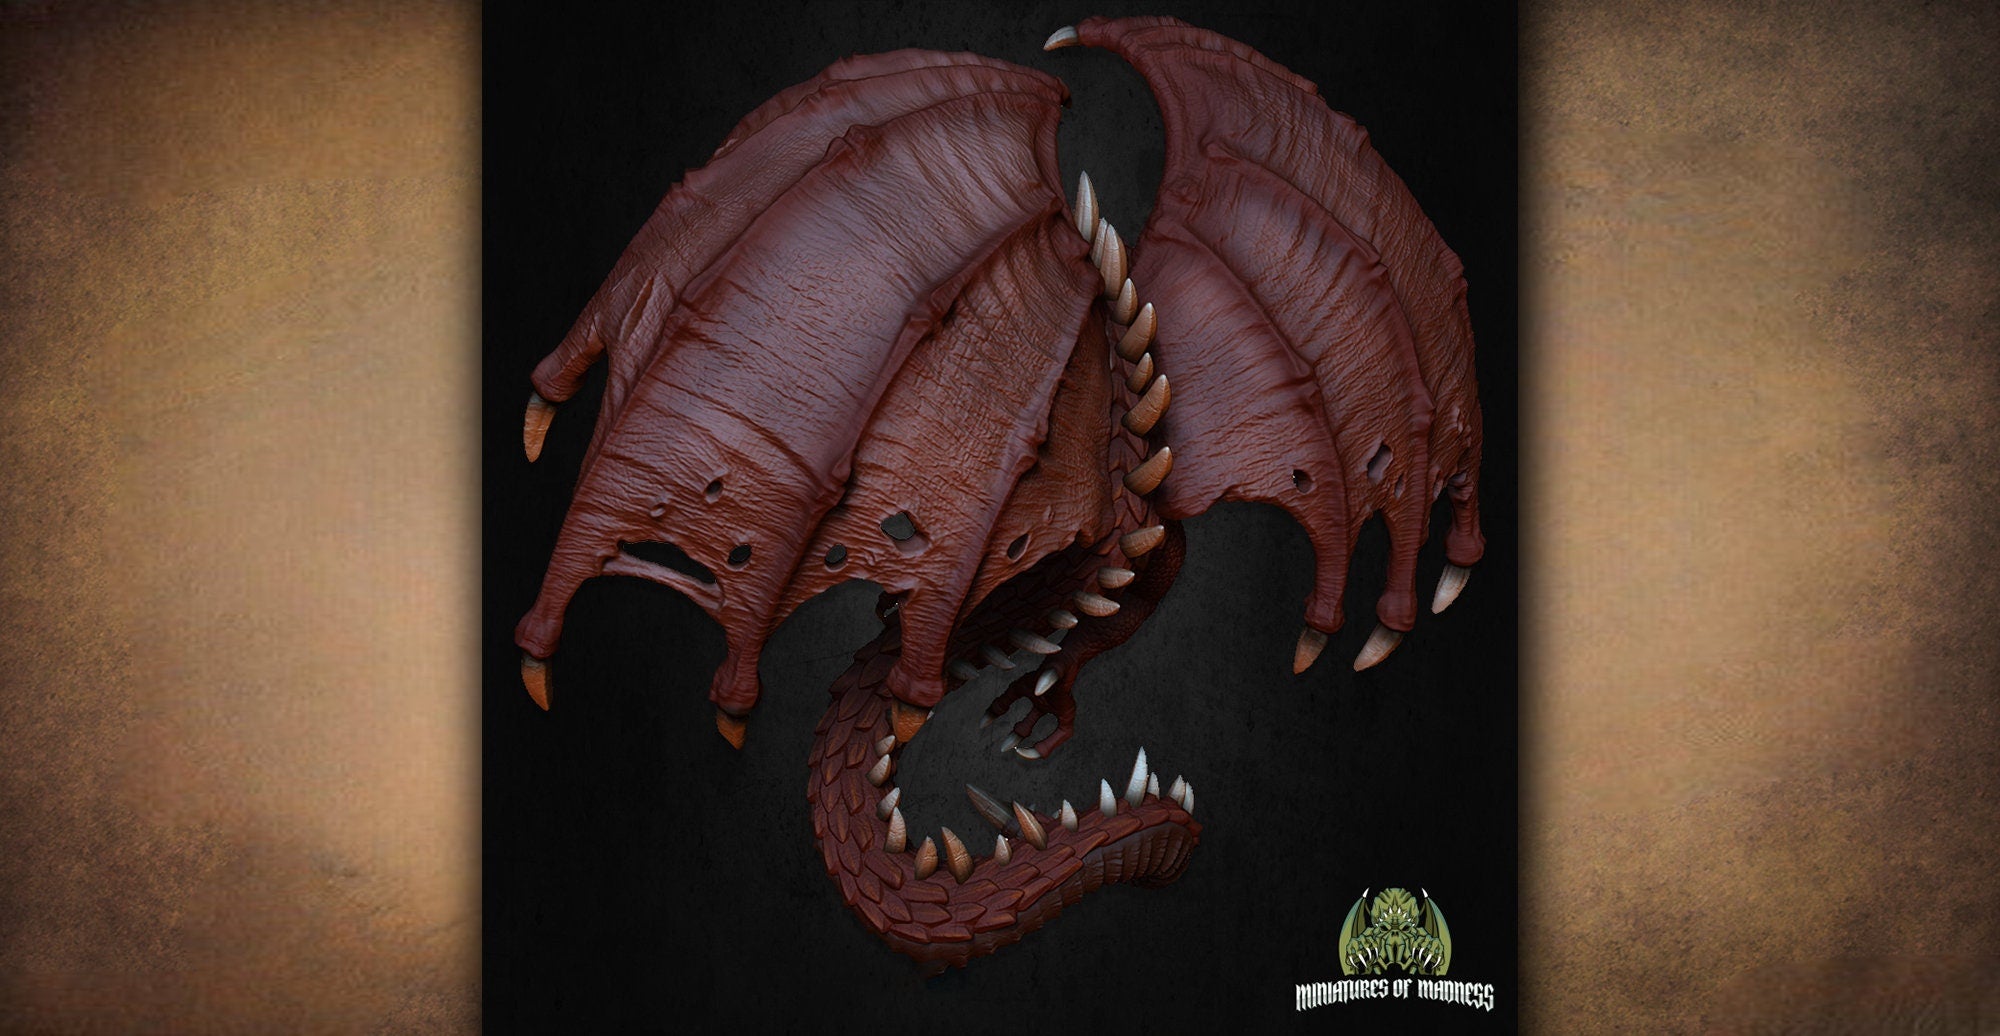 RED DRAGON "Last Words" | 12K 3D Print | Dungeons and Dragons | DnD | Pathfinder | Tabletop | Hero Size | 28-32 mm-Role Playing Miniatures